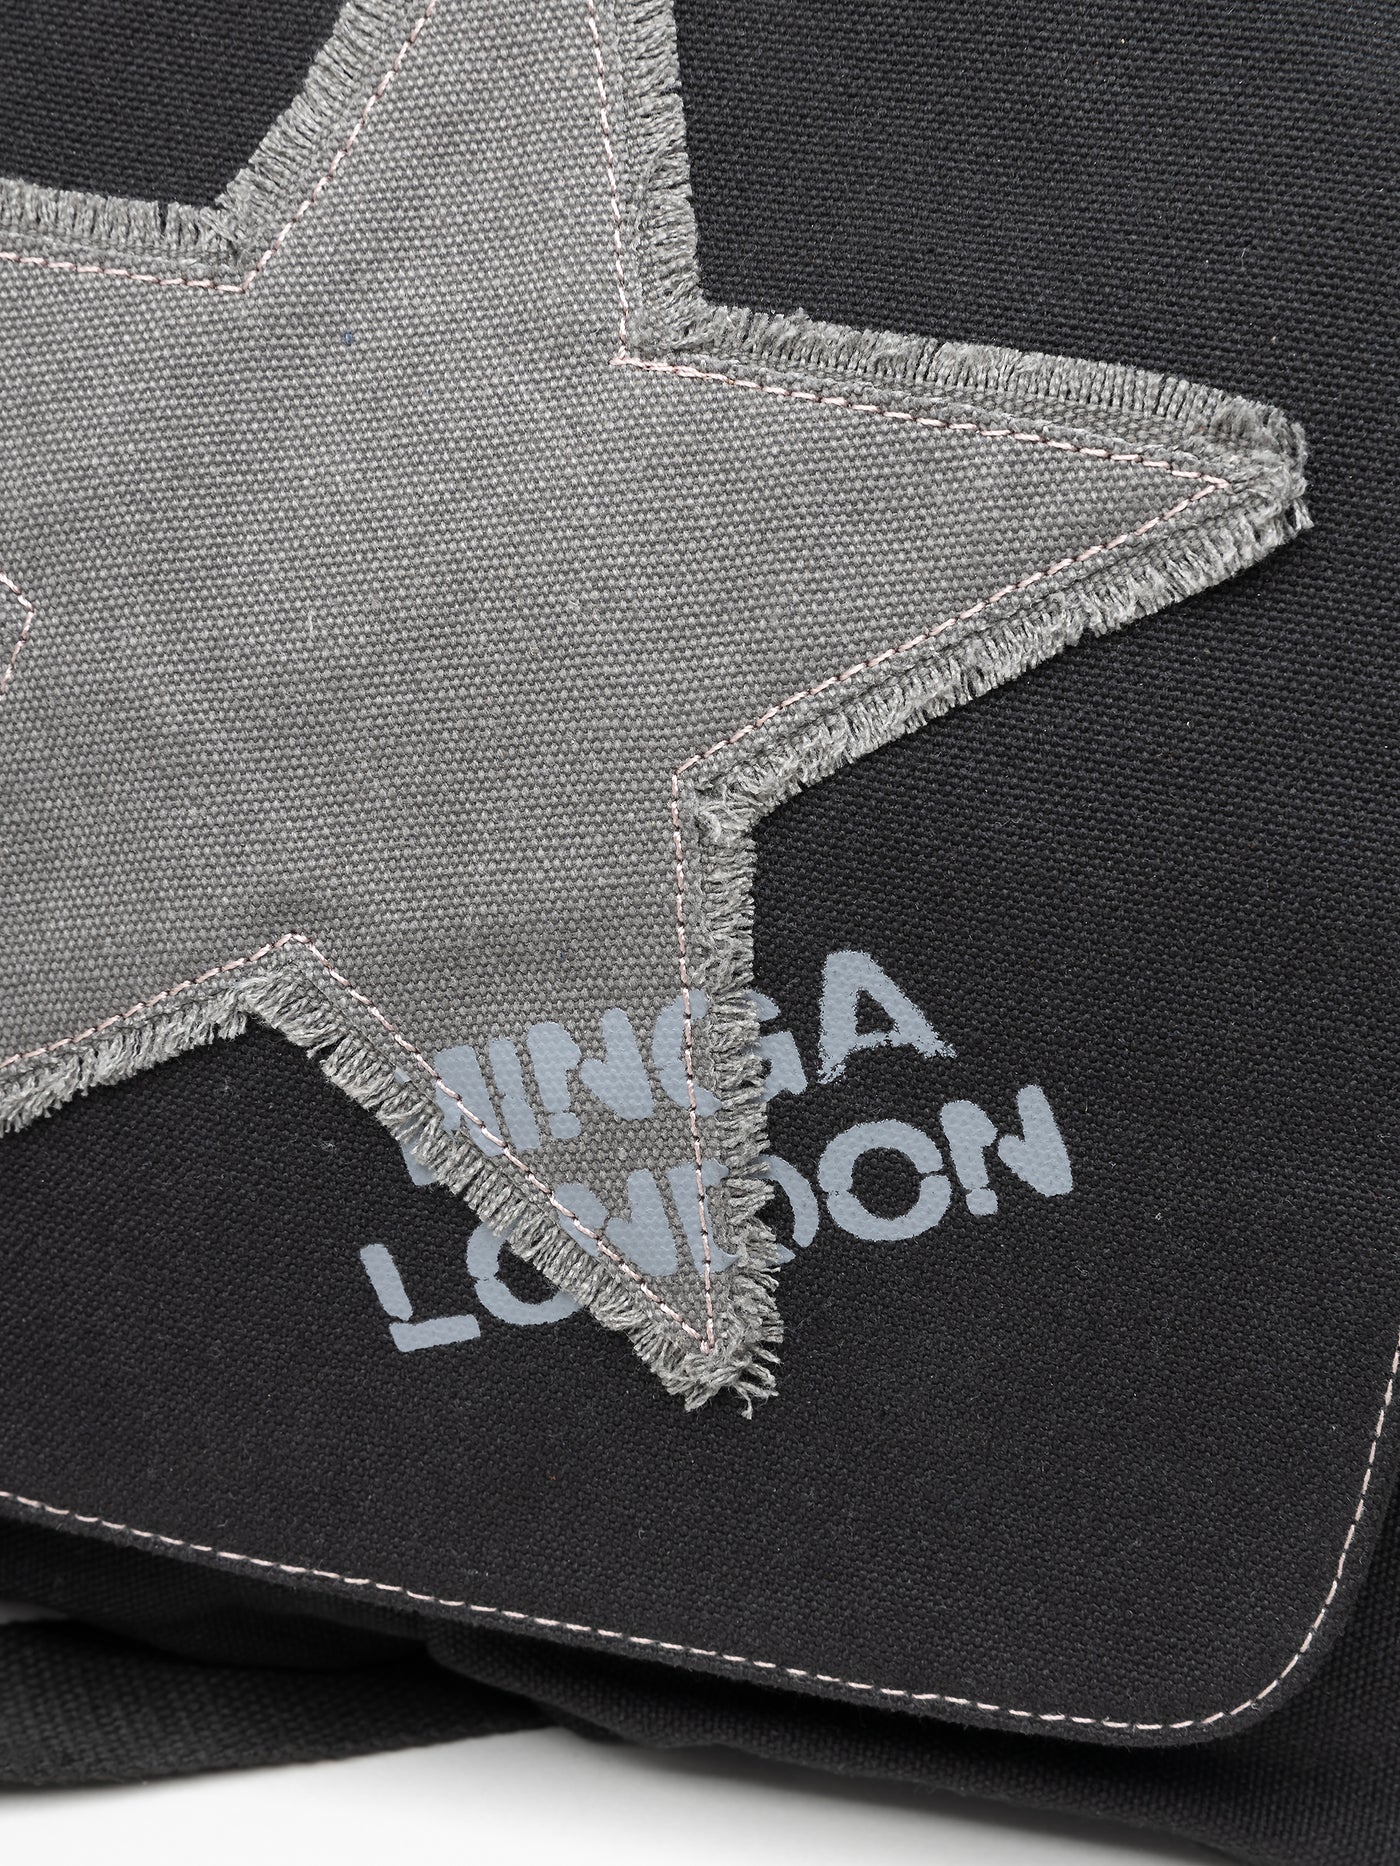 Black canvas messenger bag by Minga London. Featuring a Super Star design. Stylish and practical accessory for carrying essentials with flair.